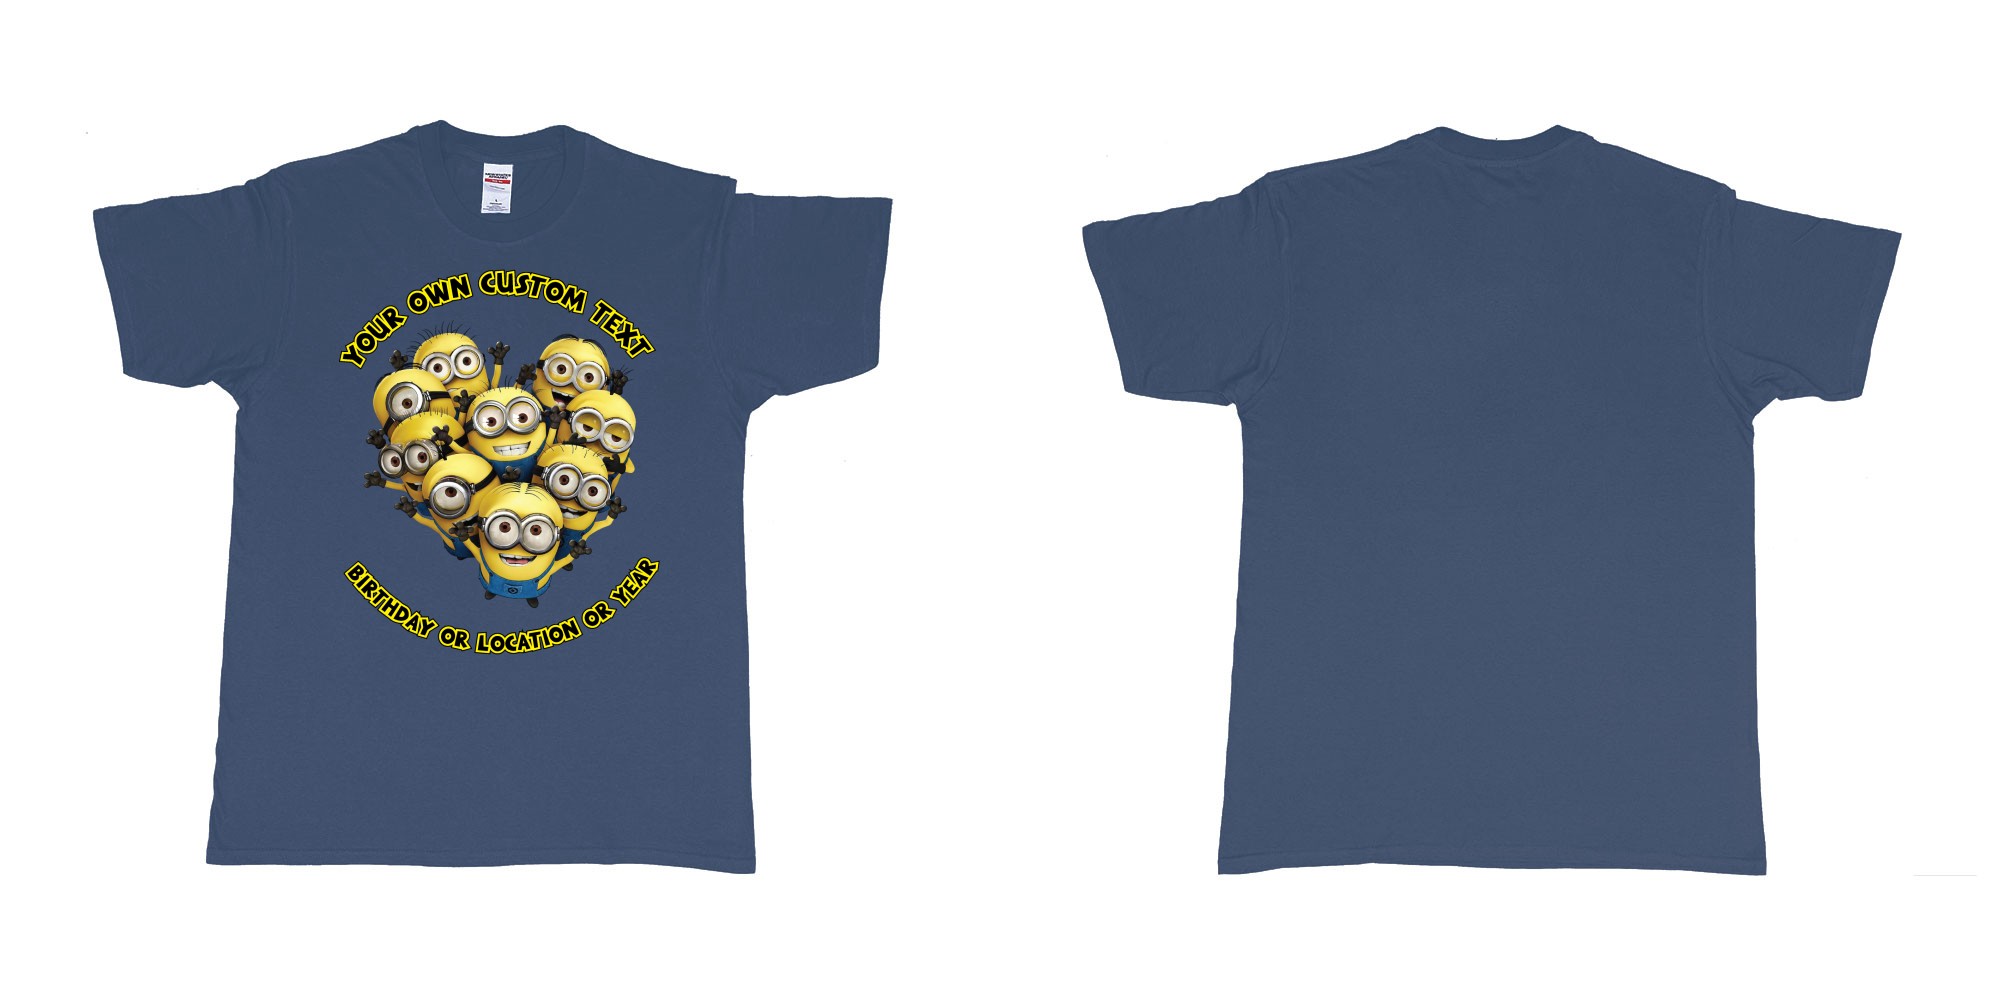 Custom tshirt design minions celebrating you in fabric color navy choice your own text made in Bali by The Pirate Way